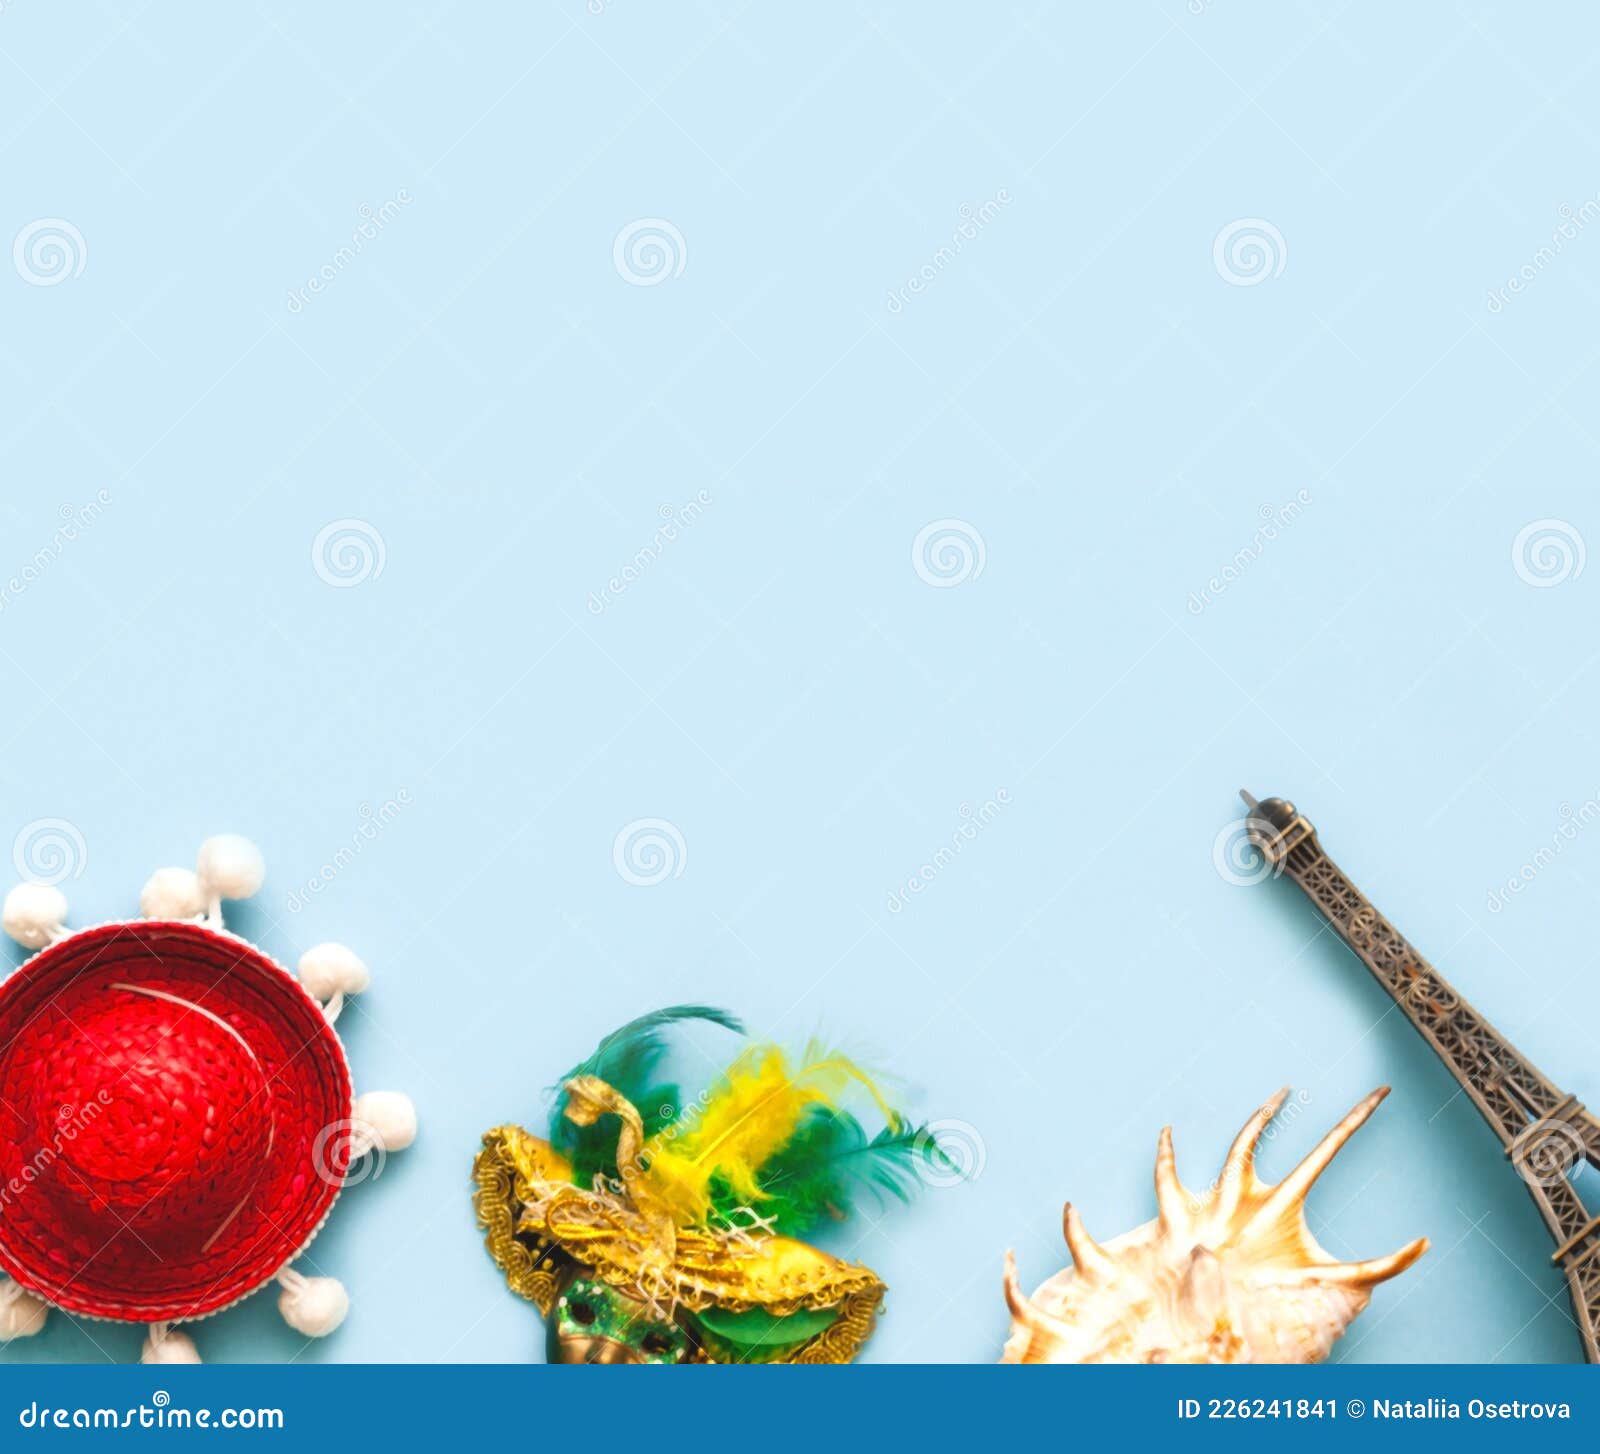 Symbols of Countries on a Blue Background. Creative Layout for Travel Design  and Advertising Stock Image - Image of celebration, europe: 226241841